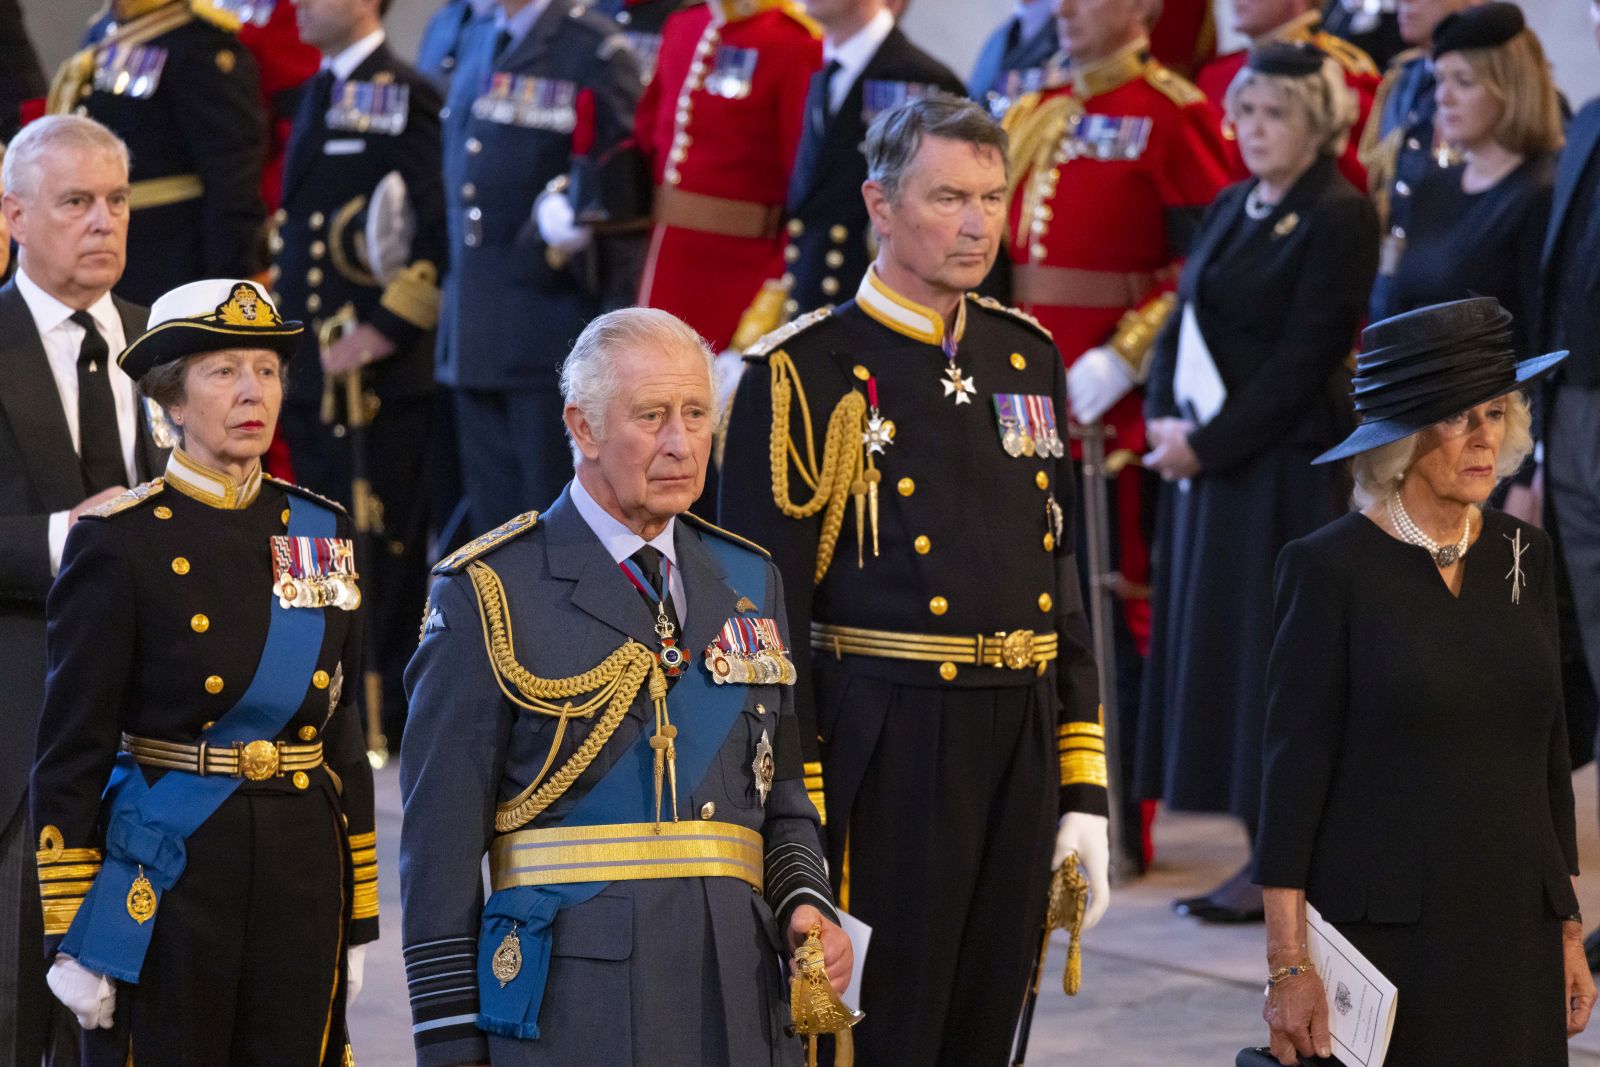 epa10184691 A handout photograph released by the UK Parliament shows Britain's King Charles III (C), Camilla, Queen Consort (R), Princess Anne, the Princess Royal (2-R), Vice Admiral Sir Timothy Laurence (2-L) and Prince Andrew, Duke of York (L) attending the service for the commencement of the Lying-in-State of Britain's Queen Elizabeth II at the Palace of Westminster in London, Britain, 14 September 2022. The queen's lying in state will last for four days, ending on the morning of the state funeral on the 19 September.  EPA/UK PARLIAMENT/ROGER HARRIS HANDOUT -- MANDATORY CREDIT: UK PARLIAMENT/ROGER HARRIS -- HANDOUT EDITORIAL USE ONLY/NO SALES